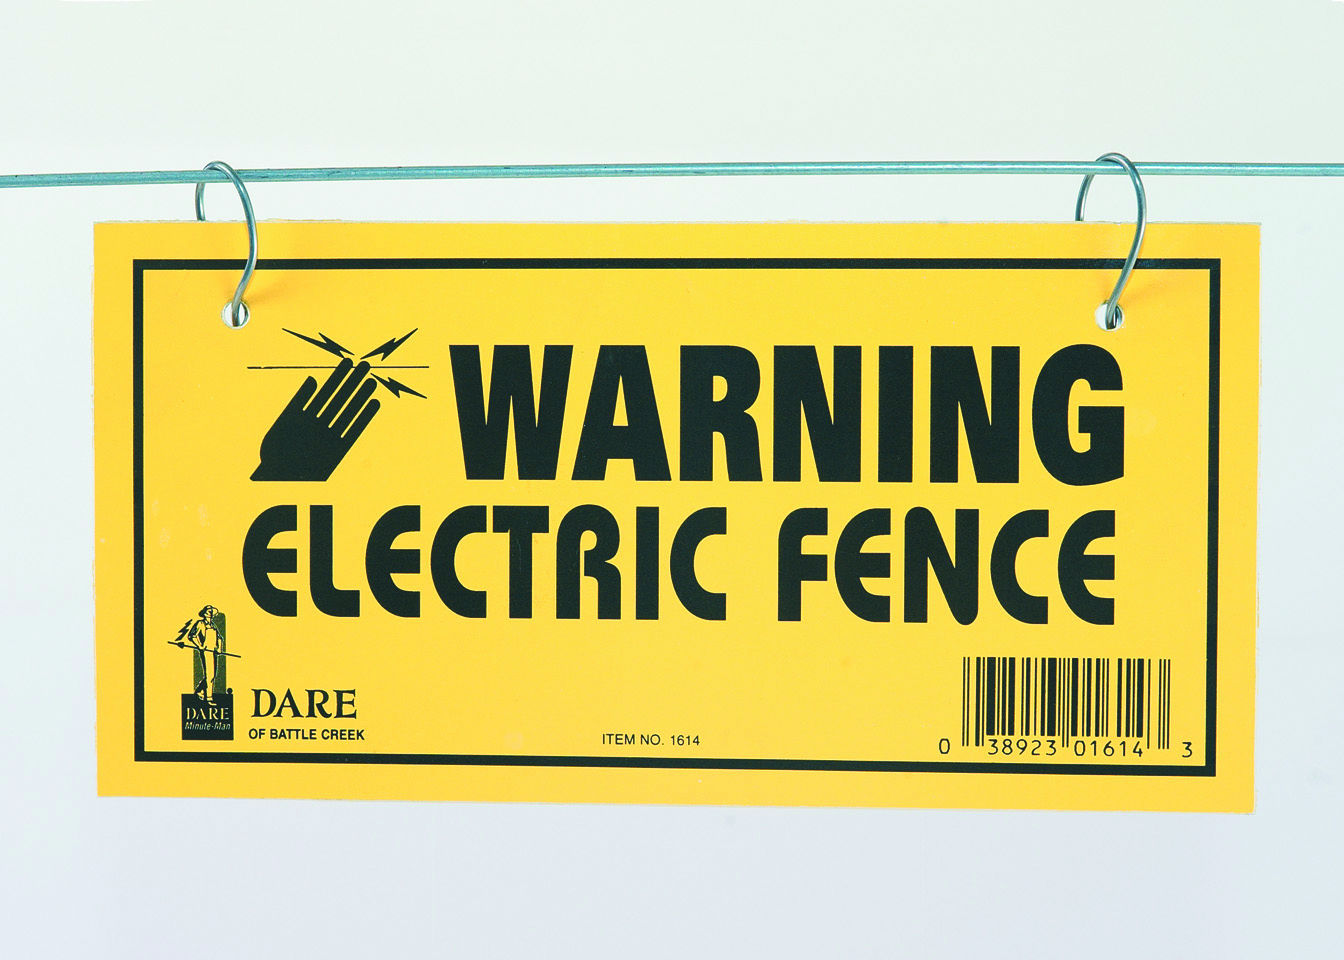 ELECTRIC FENCE WARNING SIGN